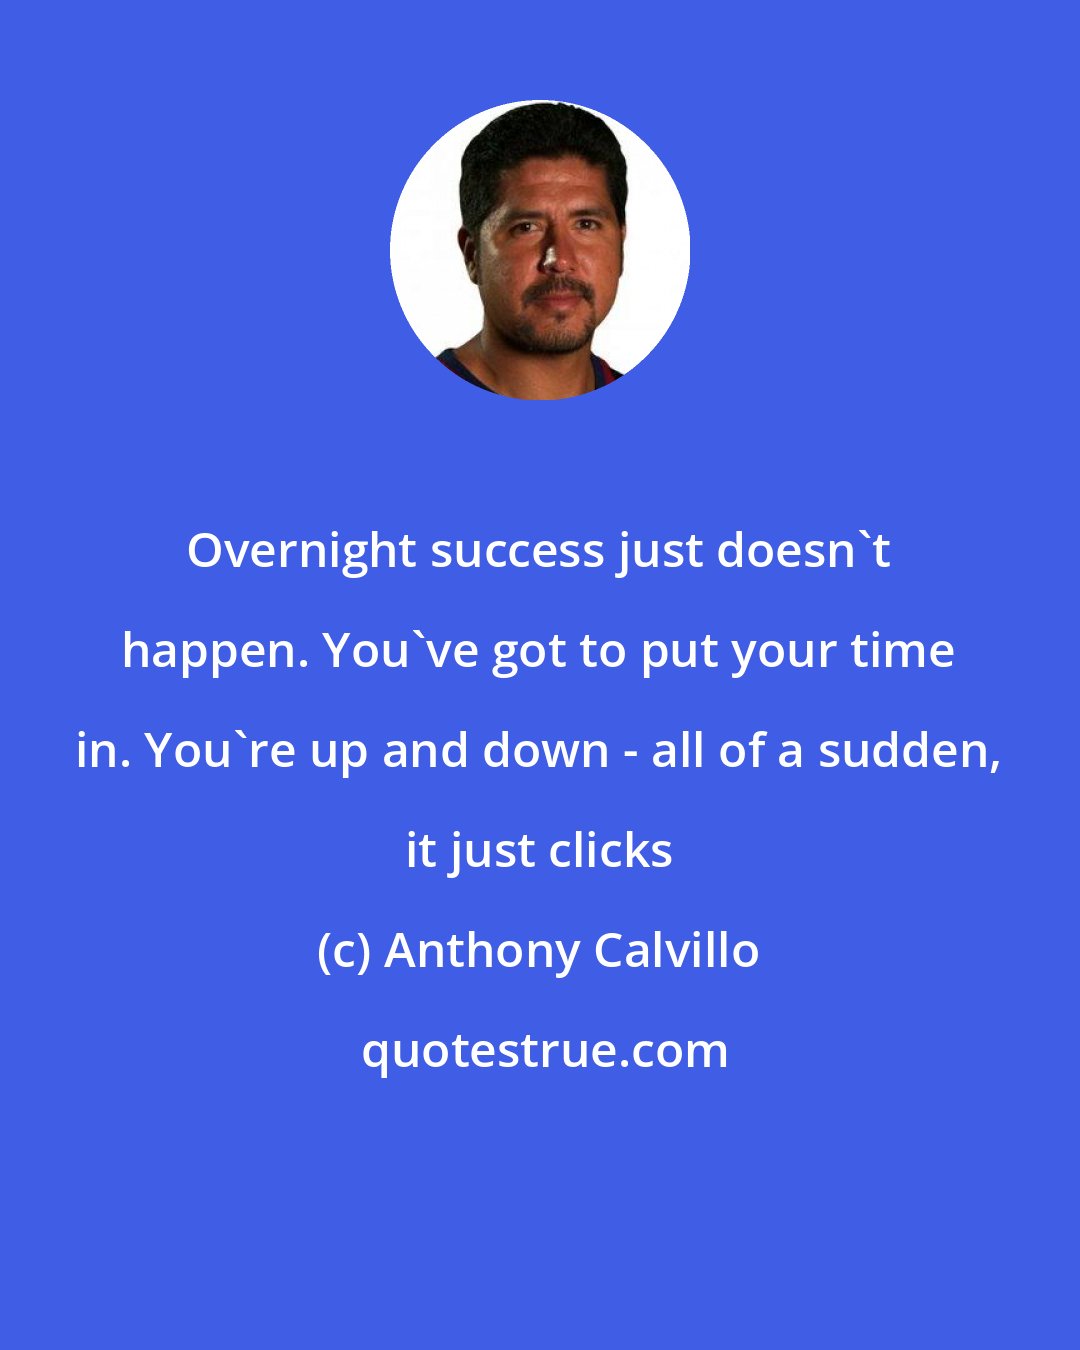 Anthony Calvillo: Overnight success just doesn't happen. You've got to put your time in. You're up and down - all of a sudden, it just clicks